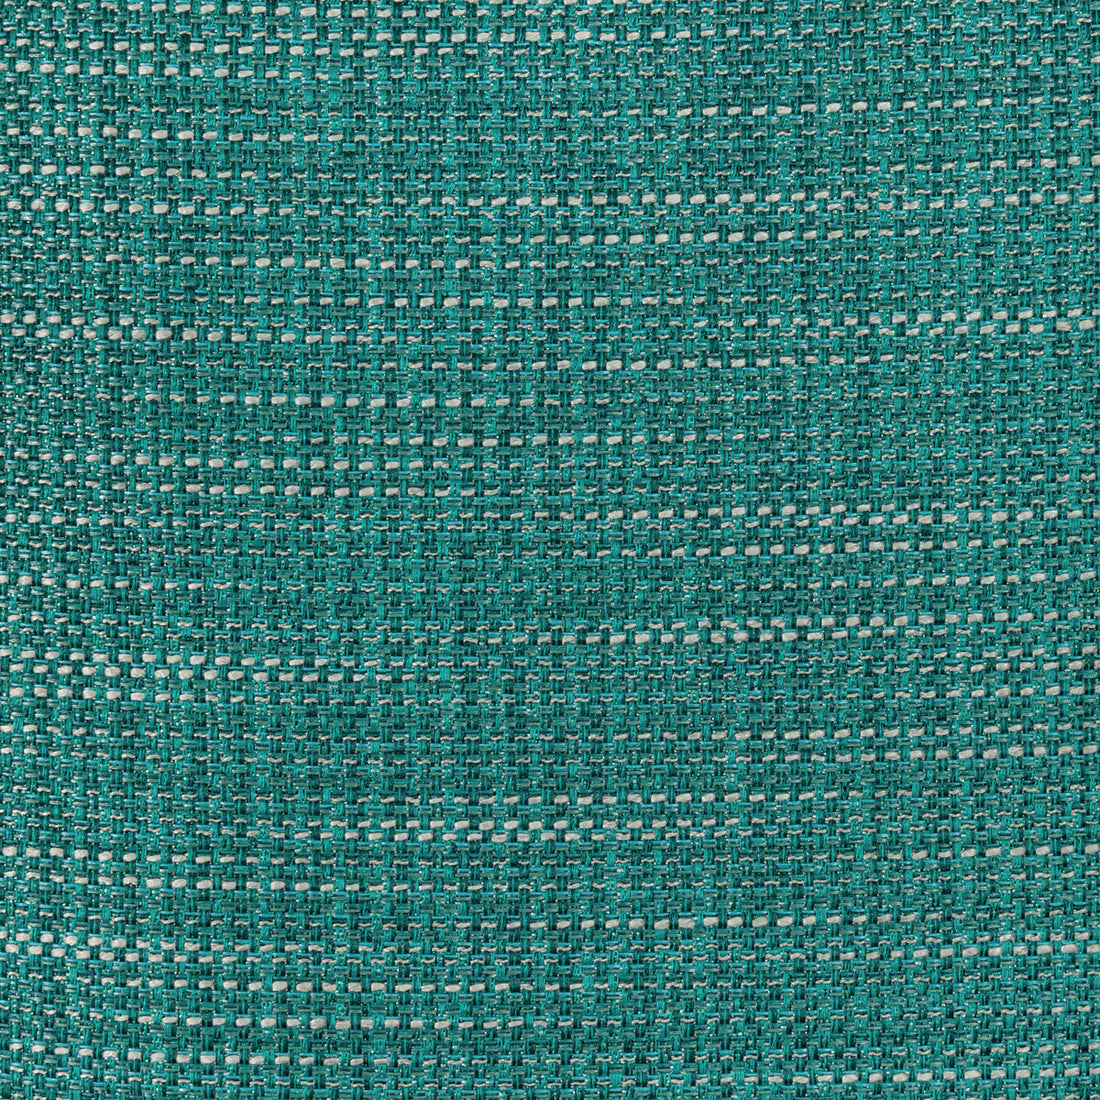 Luma Texture fabric in teal color - pattern 4947.1535.0 - by Kravet Contract in the Fr Window Luma Texture collection